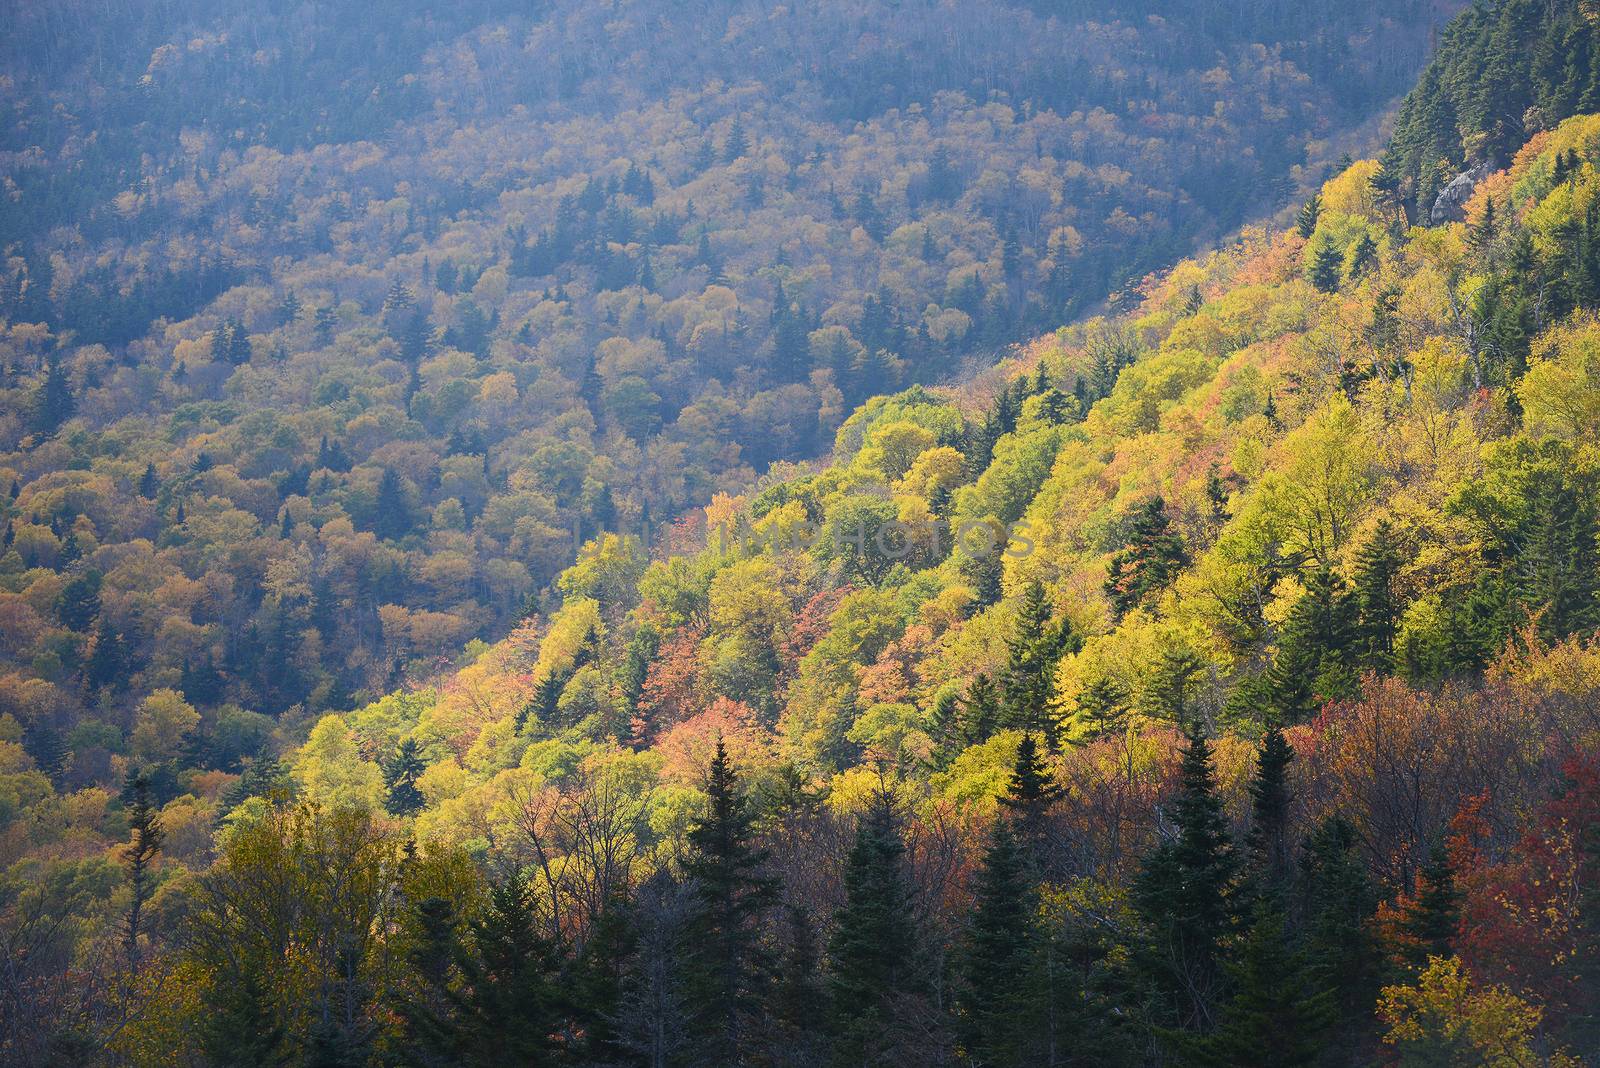 trees in vermont are changing color in autumn